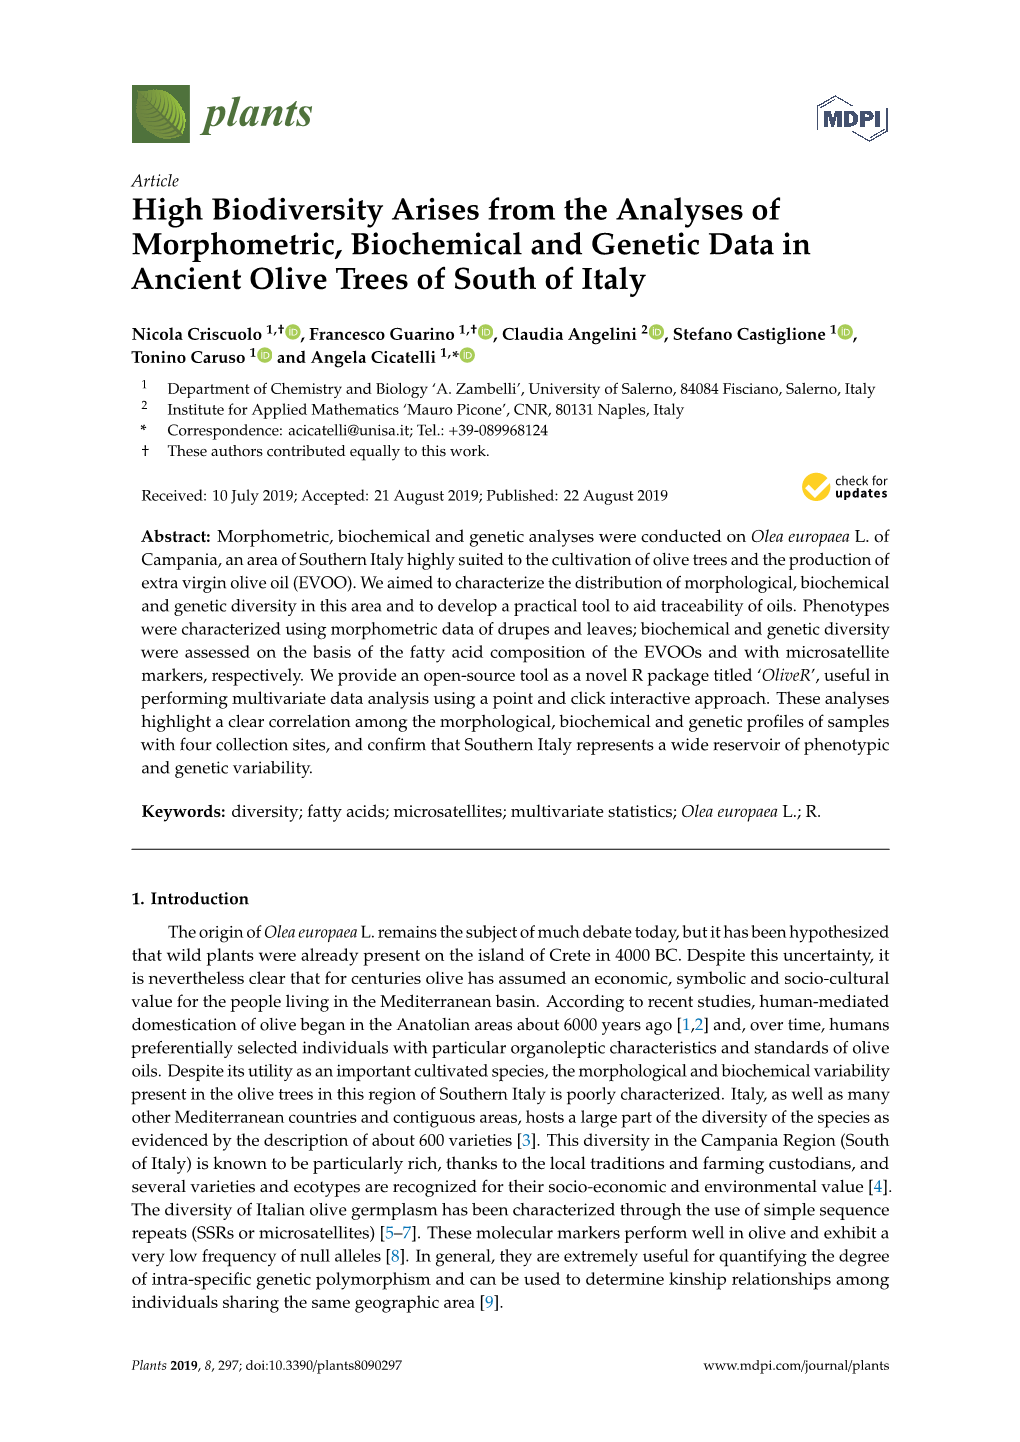 High Biodiversity Arises from the Analyses of Morphometric, Biochemical and Genetic Data in Ancient Olive Trees of South of Italy